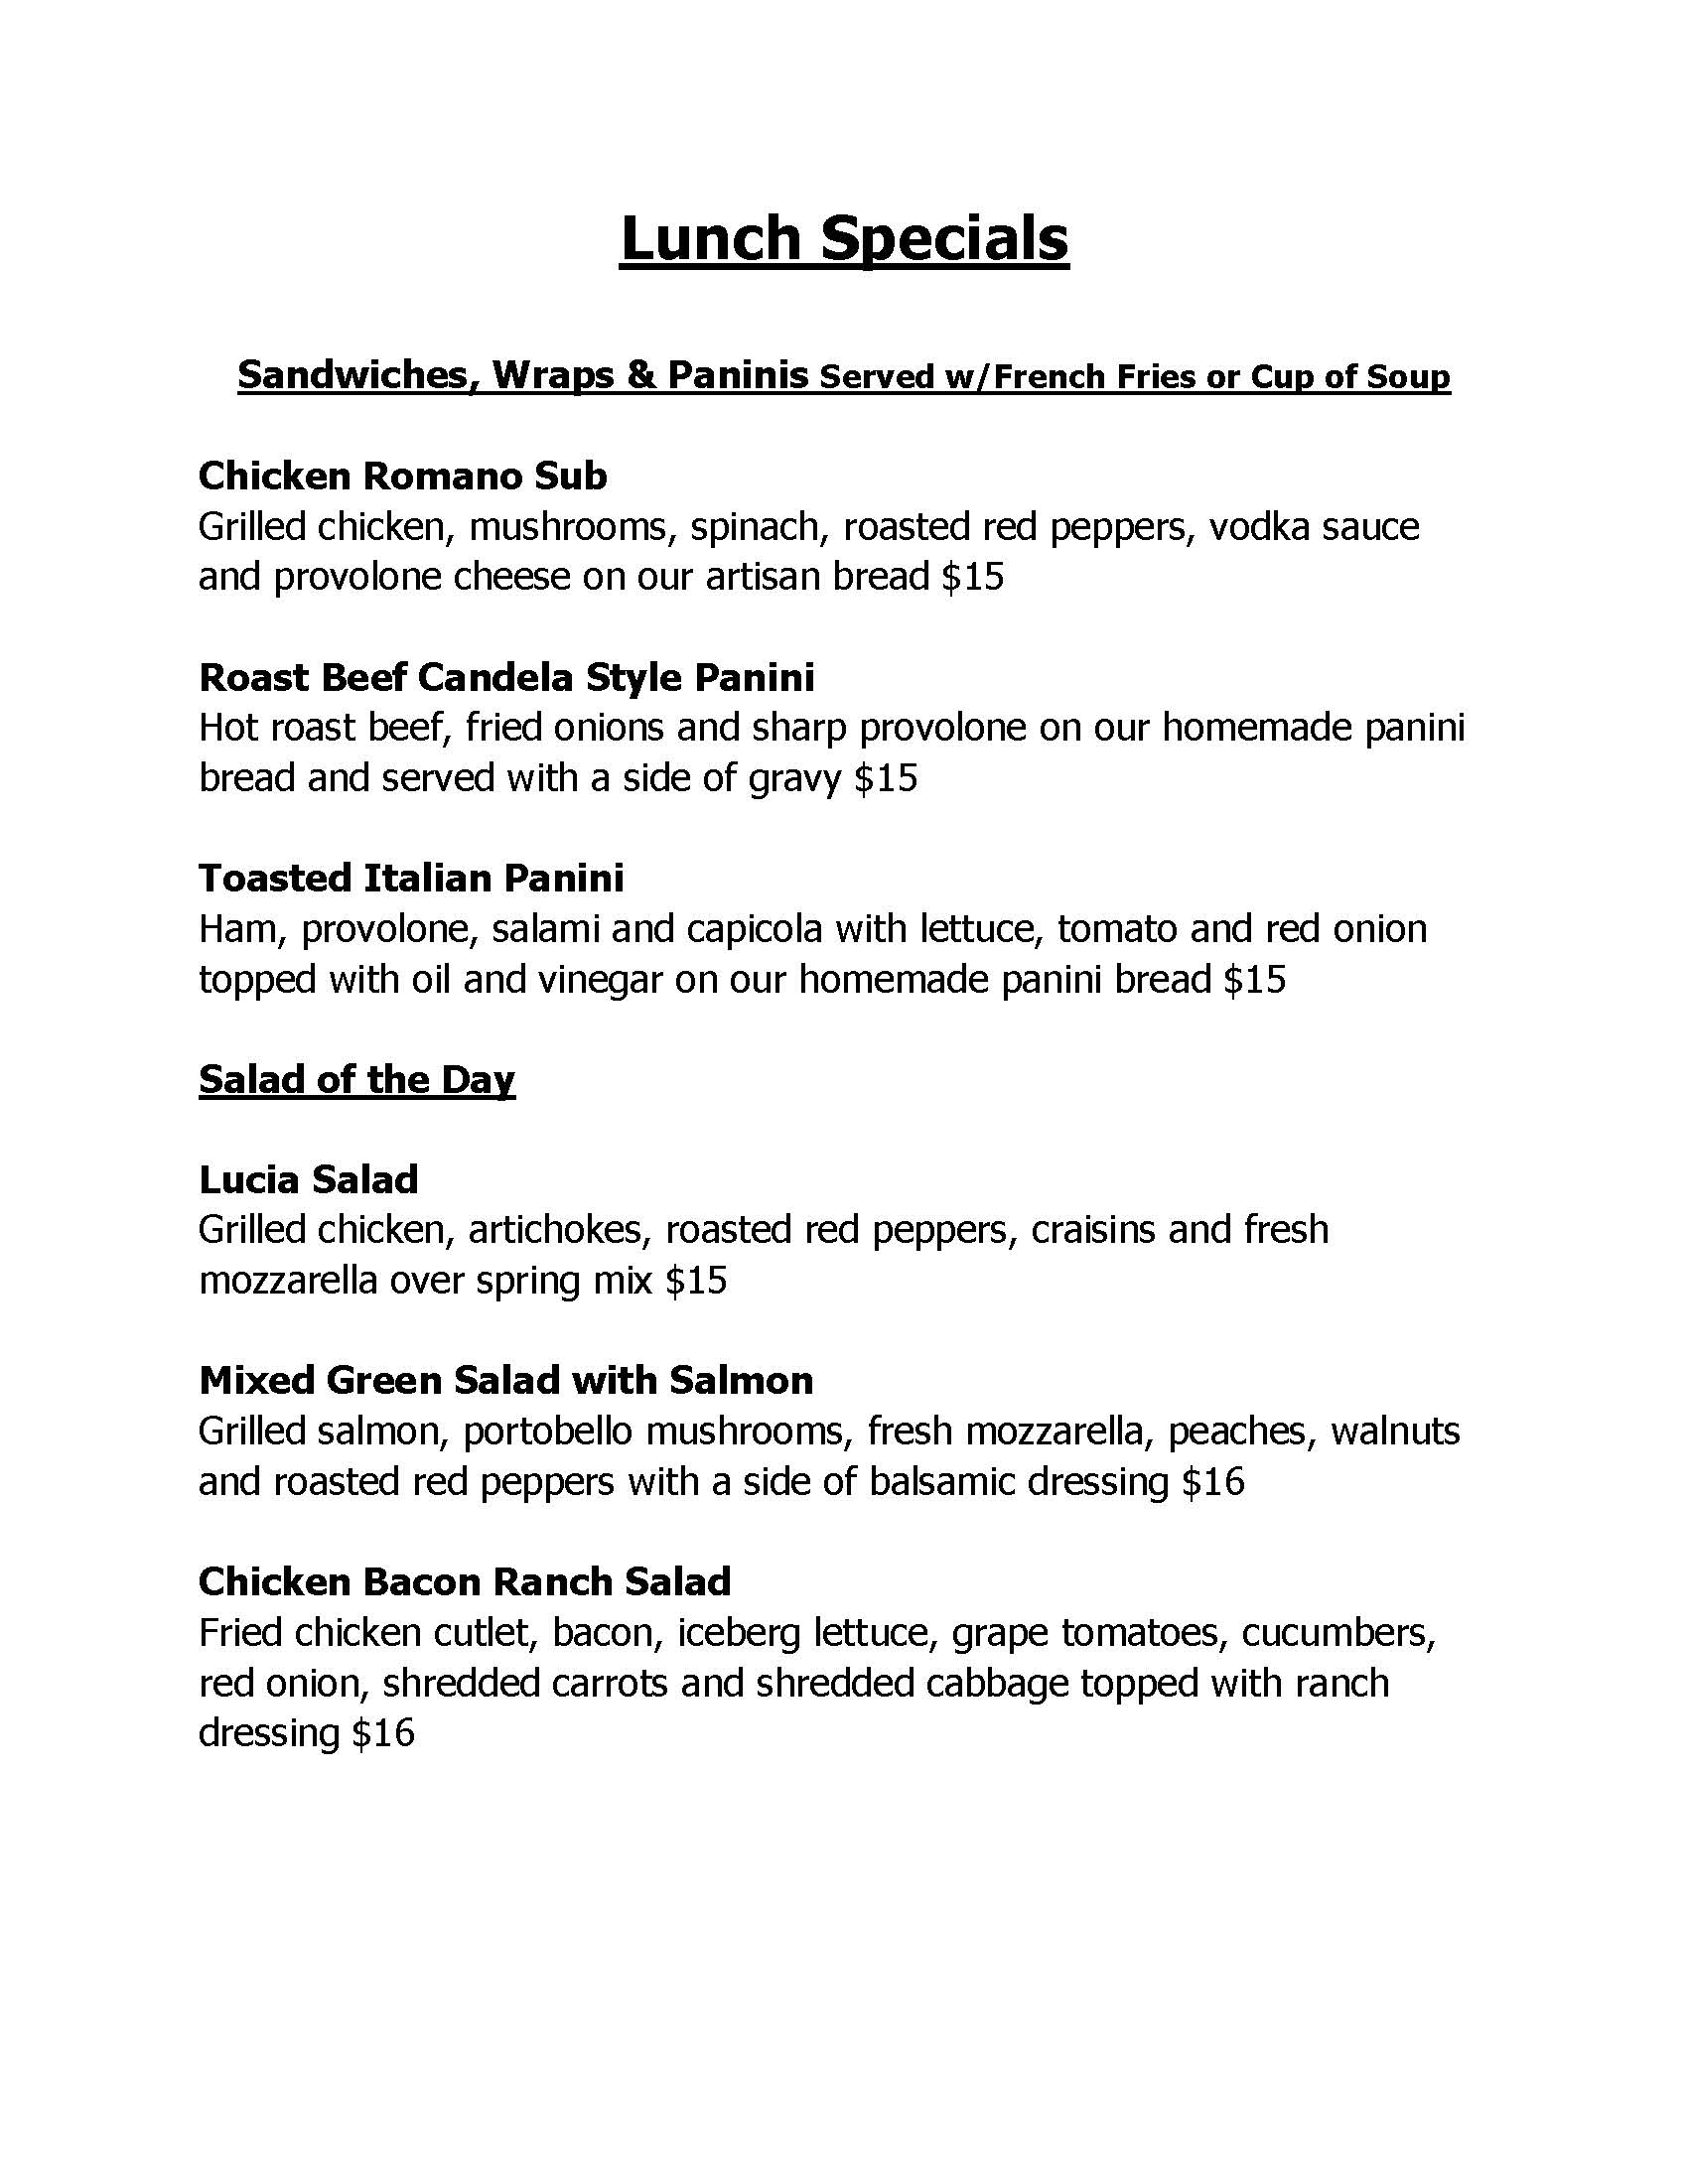 Lunch specials menu with a variety of sandwiches, wraps, salads, and the soup of the day with prices listed.